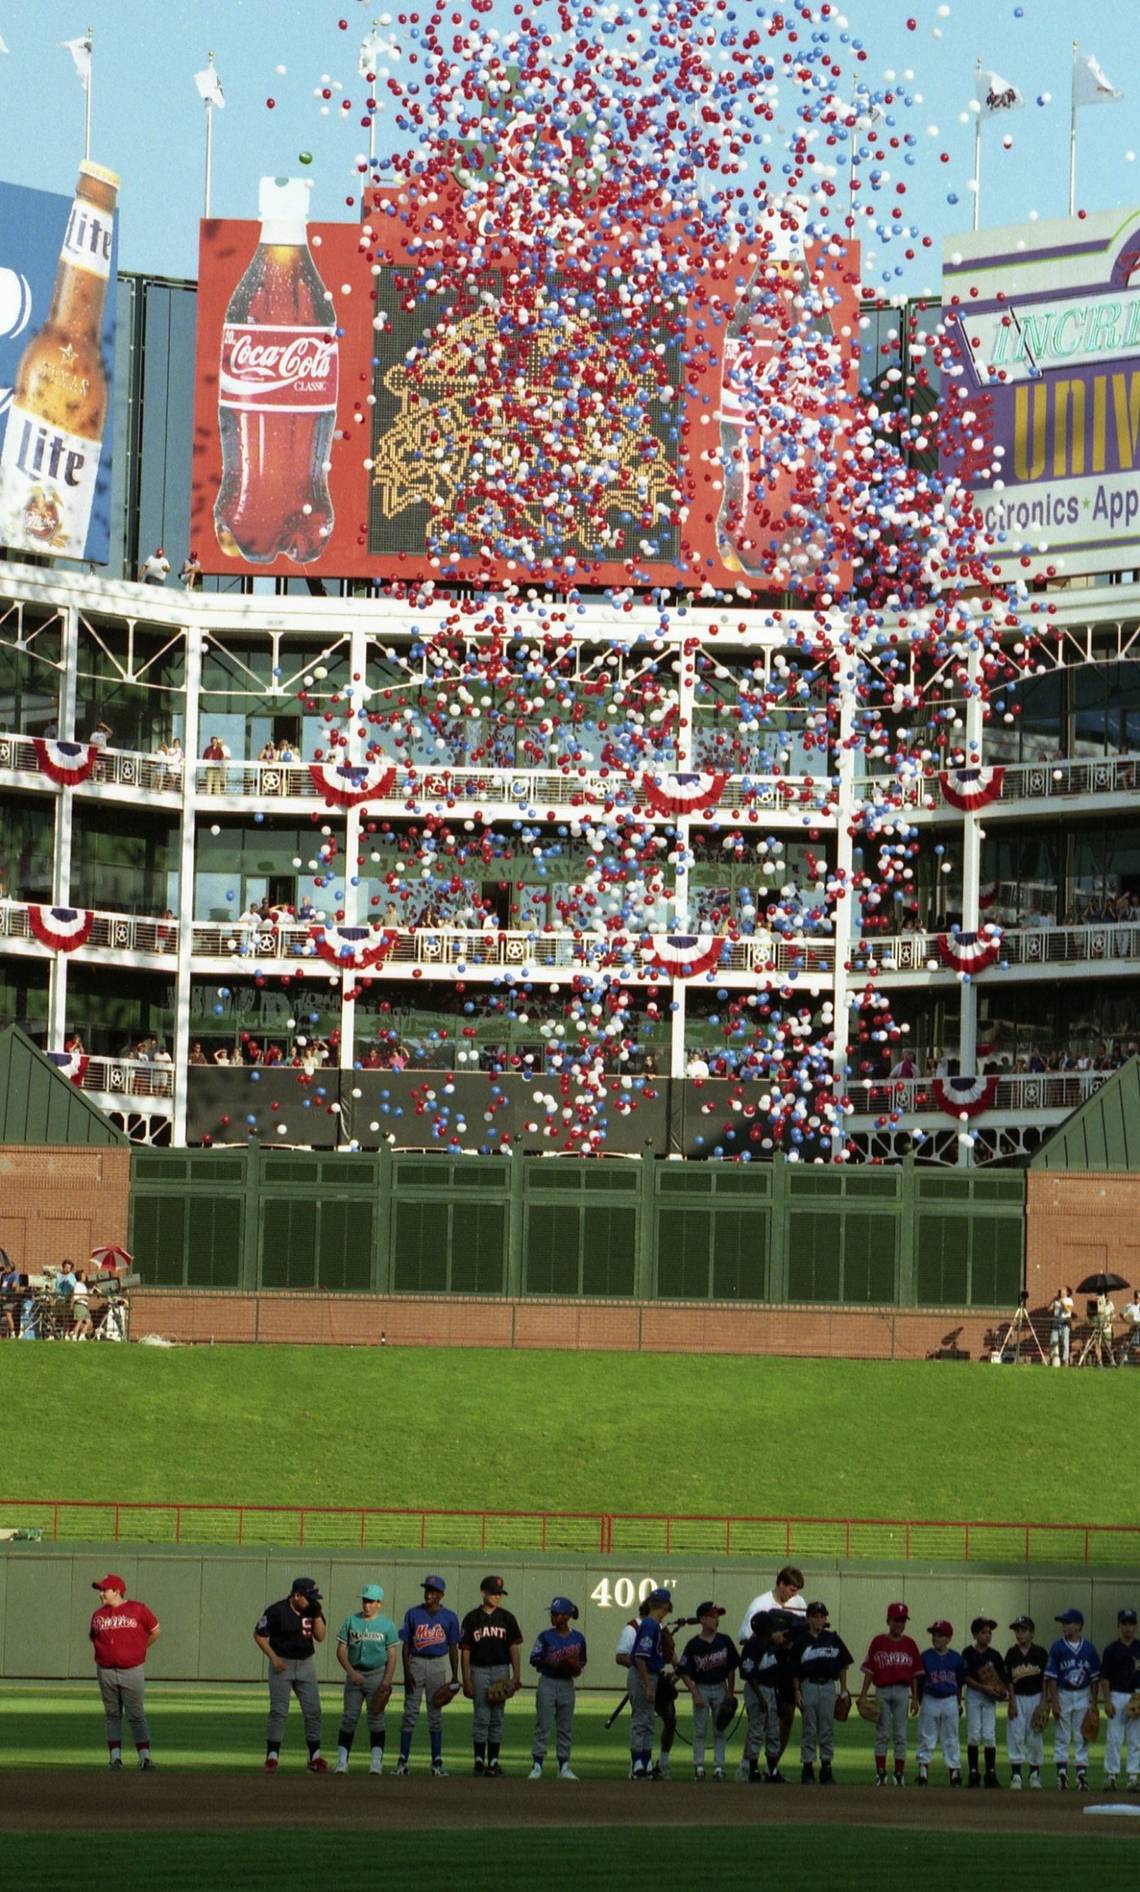 The last time: Remembering the 1995 All-Star Game in Arlington